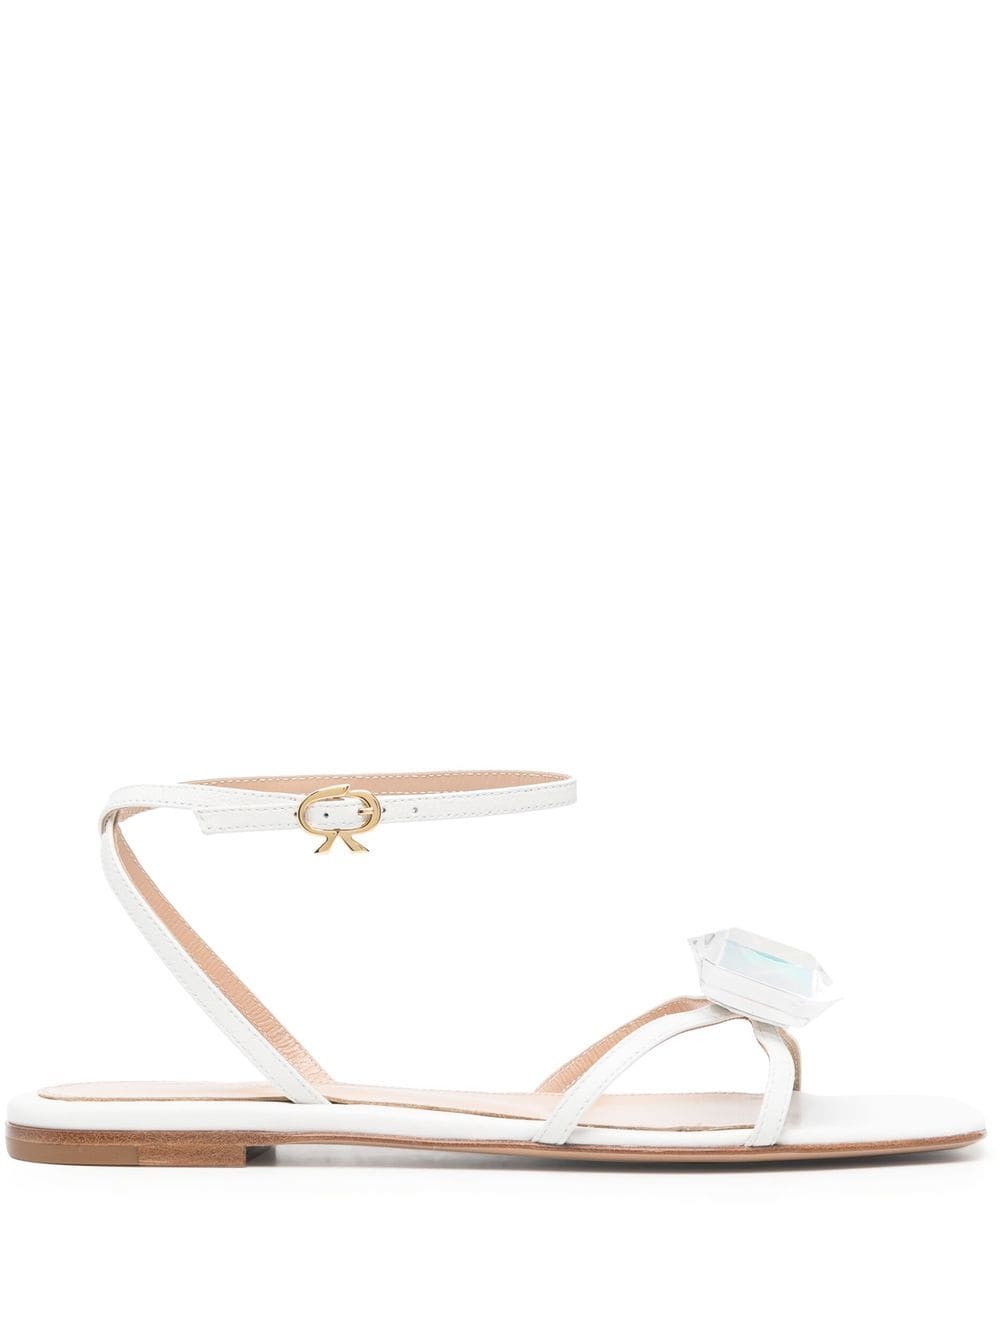 Gianvito Rossi embellished leather flat sandals - White von Gianvito Rossi